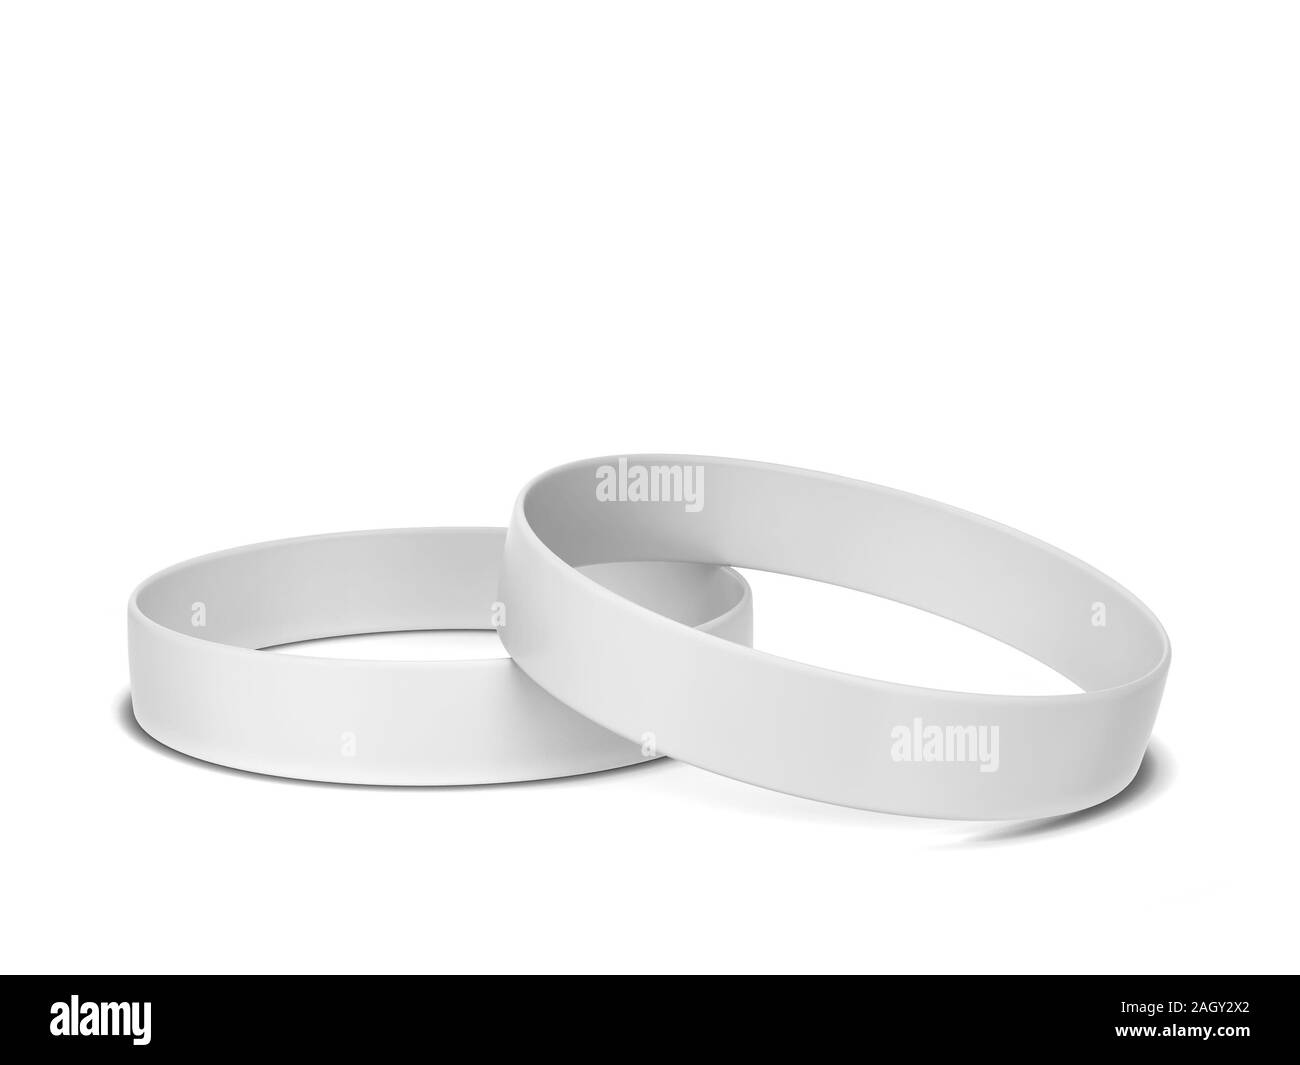 Two rubber bracelets. 3d illustration isolated on white background Stock Photo